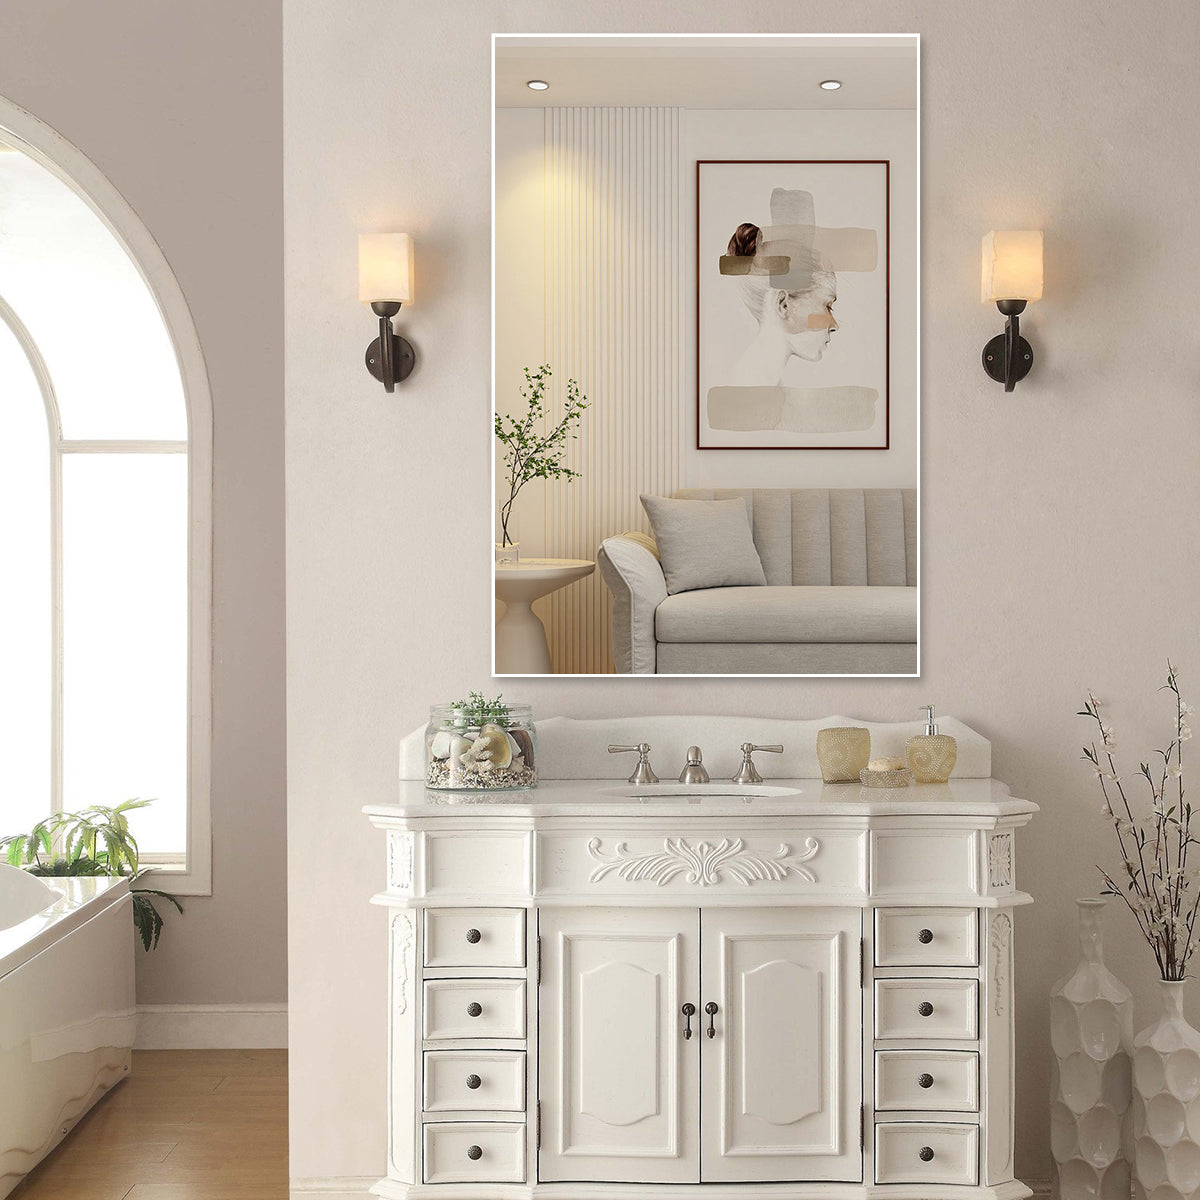 48"x32" Oversized Modern Rectangle Bathroom Mirror with White Frame Decorative Large Wall Mirrors for Bathroom Living Room Bedroom Vertical or Horizontal Wall Mounted mirror with Aluminum Frame